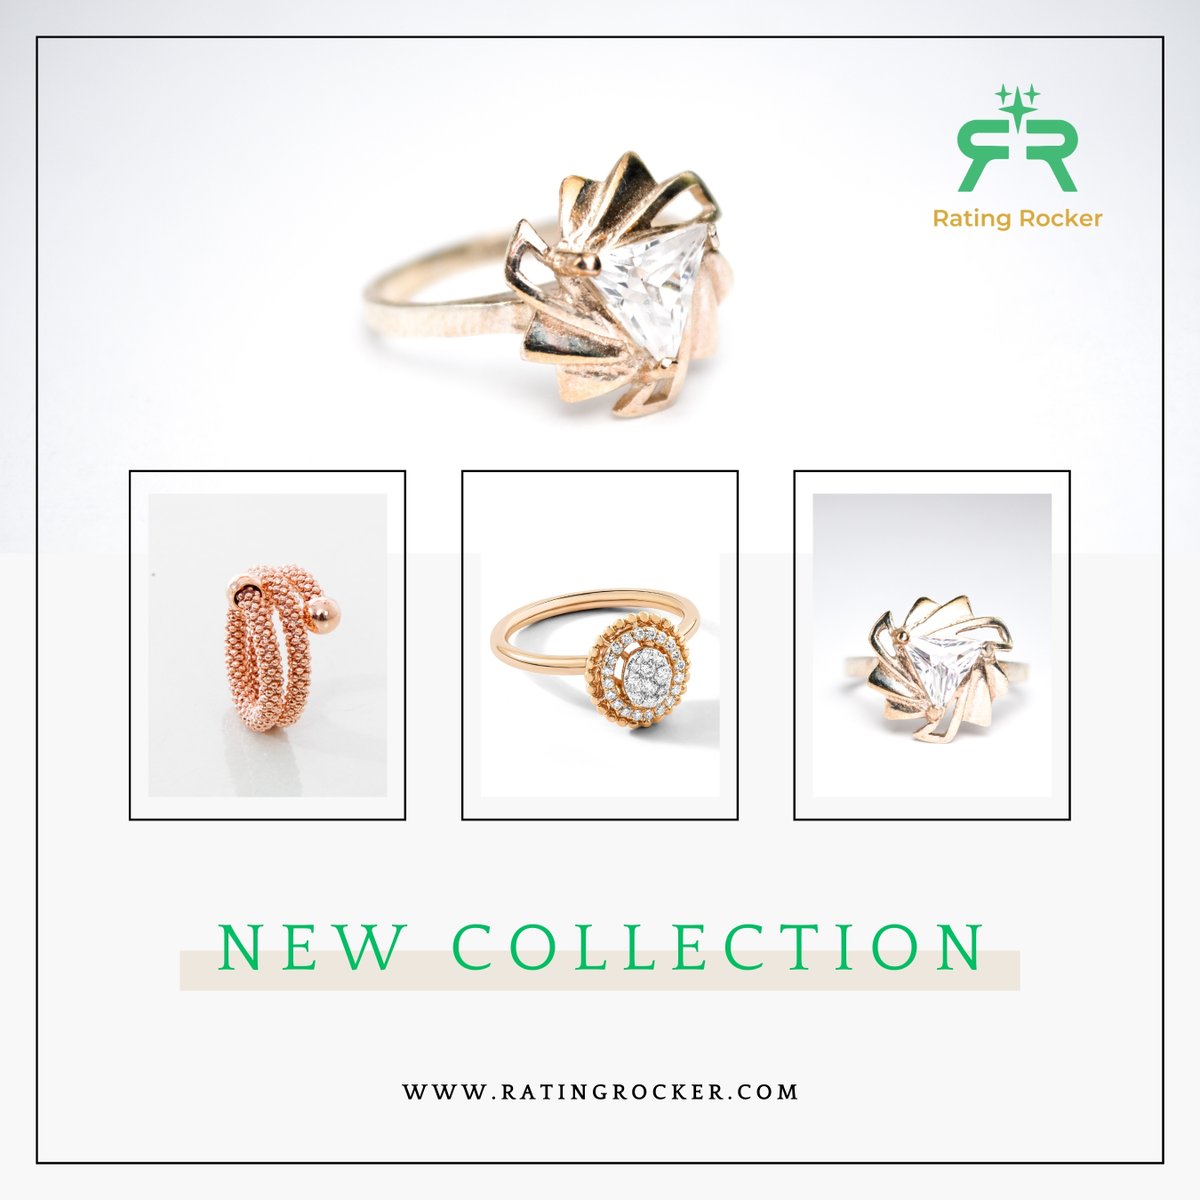 Obsessed with your new statement Rings? Help a fellow fashionista out and share your thoughts!

website: ratingrocker.com

Plus, the most engaging review each week gets a special shoutout! 

Don't forget to include pics of your stunning look!

#jewelryreview #getfeatured